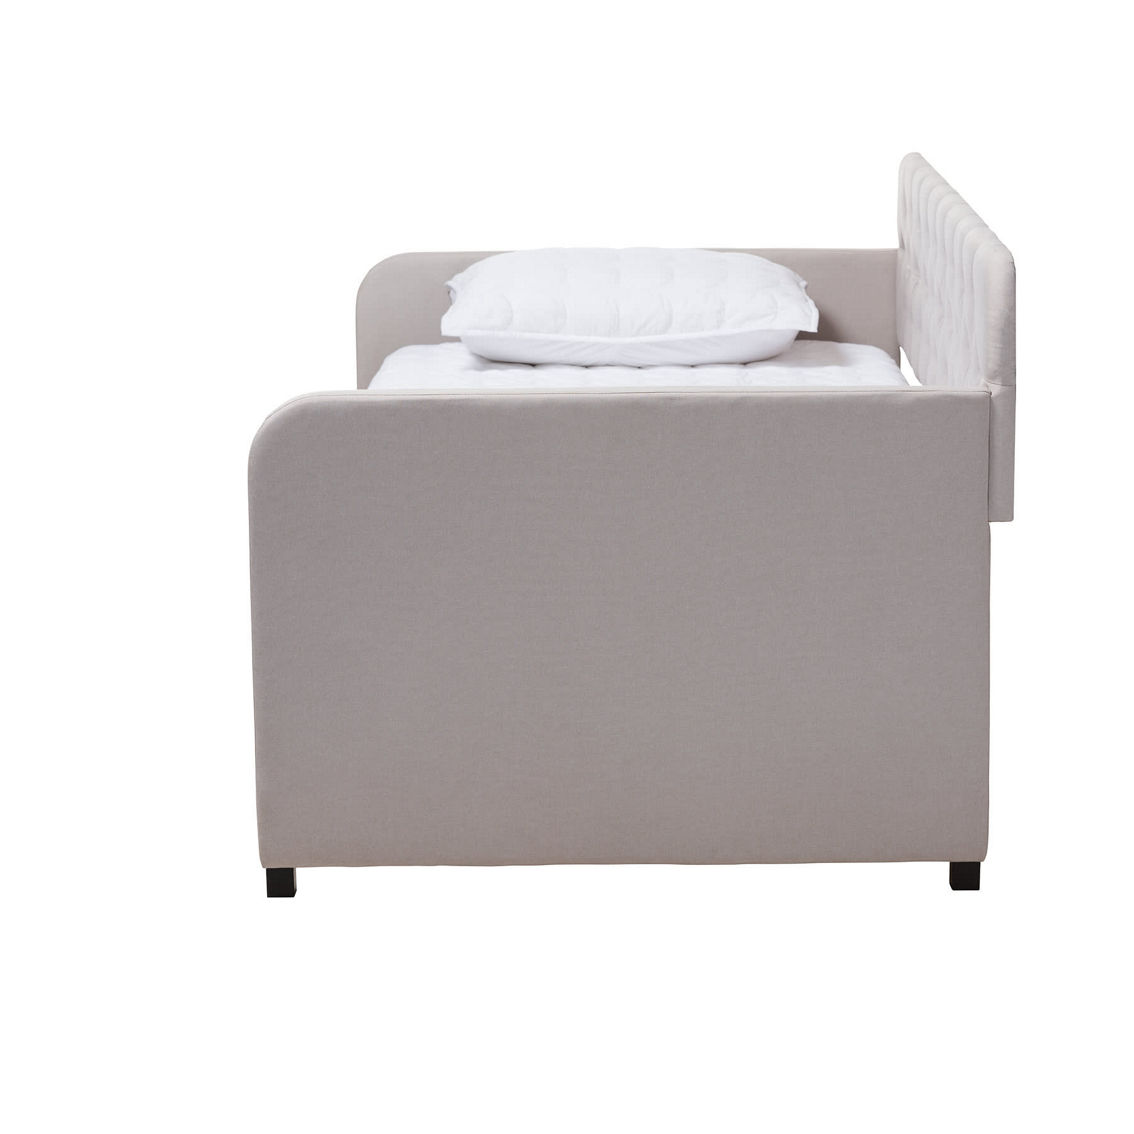 Baxton Studio Camelia Upholstered Twin Size Daybed with Trundle - Image 3 of 5